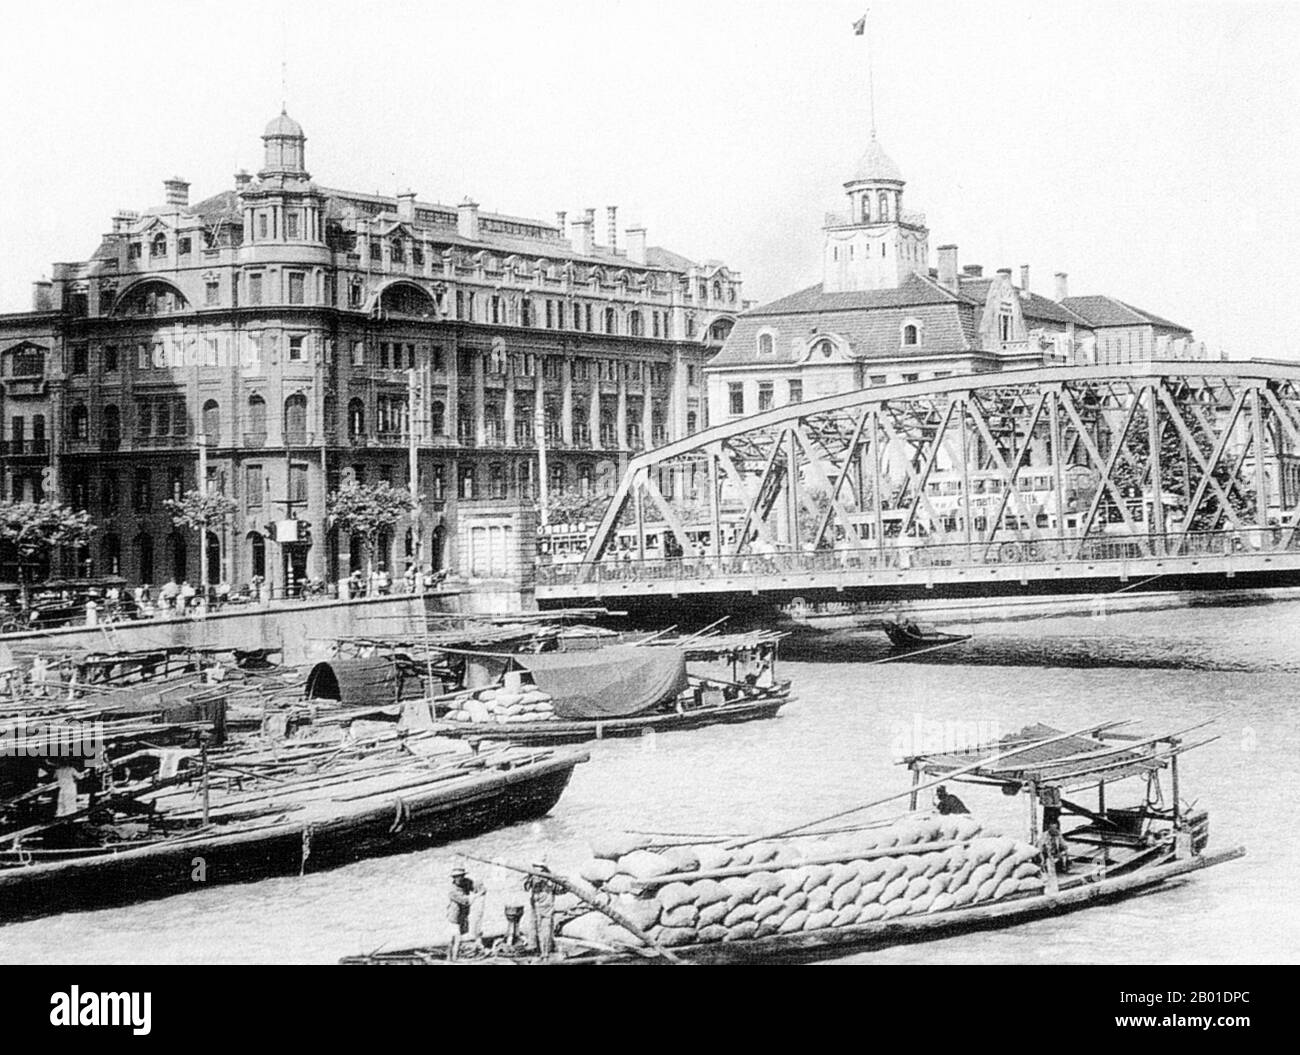 China: Shanghai's Waibaidu Bridge, located at the junction of the Huangpu River and Suzhou Creek, c. 1930s.  The Waibaidu Bridge (Chinese: 外白渡桥; pinyin: Wàibáidù Qiáo), called The Garden Bridge in English, is the first all-steel bridge, and the only surviving example of a camelback truss bridge, in China.  The fourth foreign bridge built at its location since 1856, in the downstream of the estuary of the Suzhou Creek, near its confluence with the Huangpu River and adjacent to the Bund in central Shanghai, and connecting the Huangpu and Hongkou districts, the present bridge was opened in 1908. Stock Photo